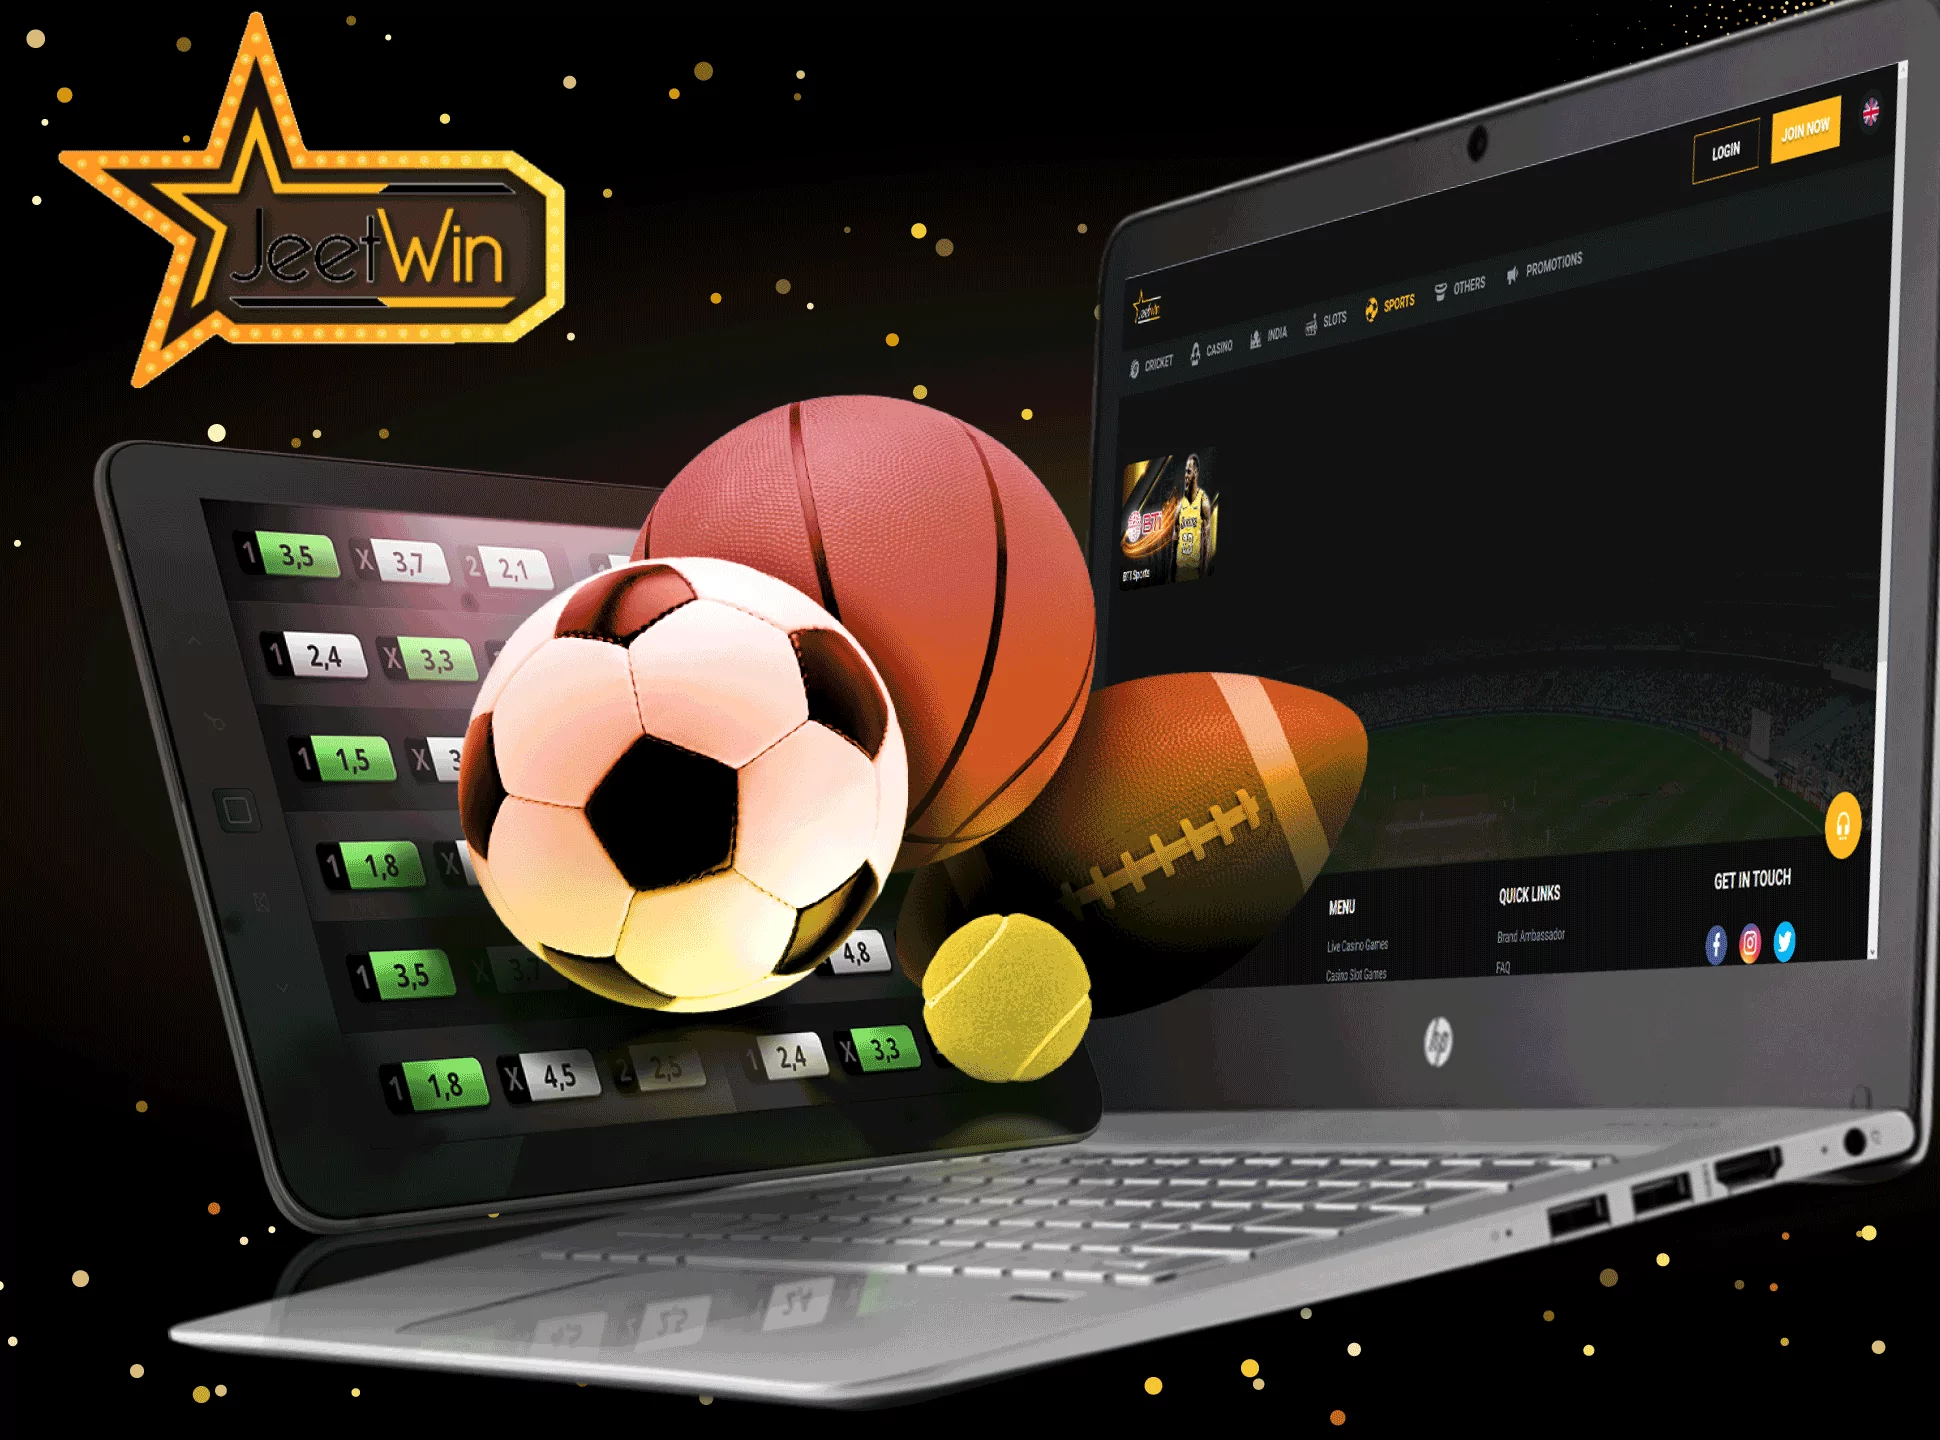 Log in to Jeetwin, top up your account, choose the sports event and place a bet.